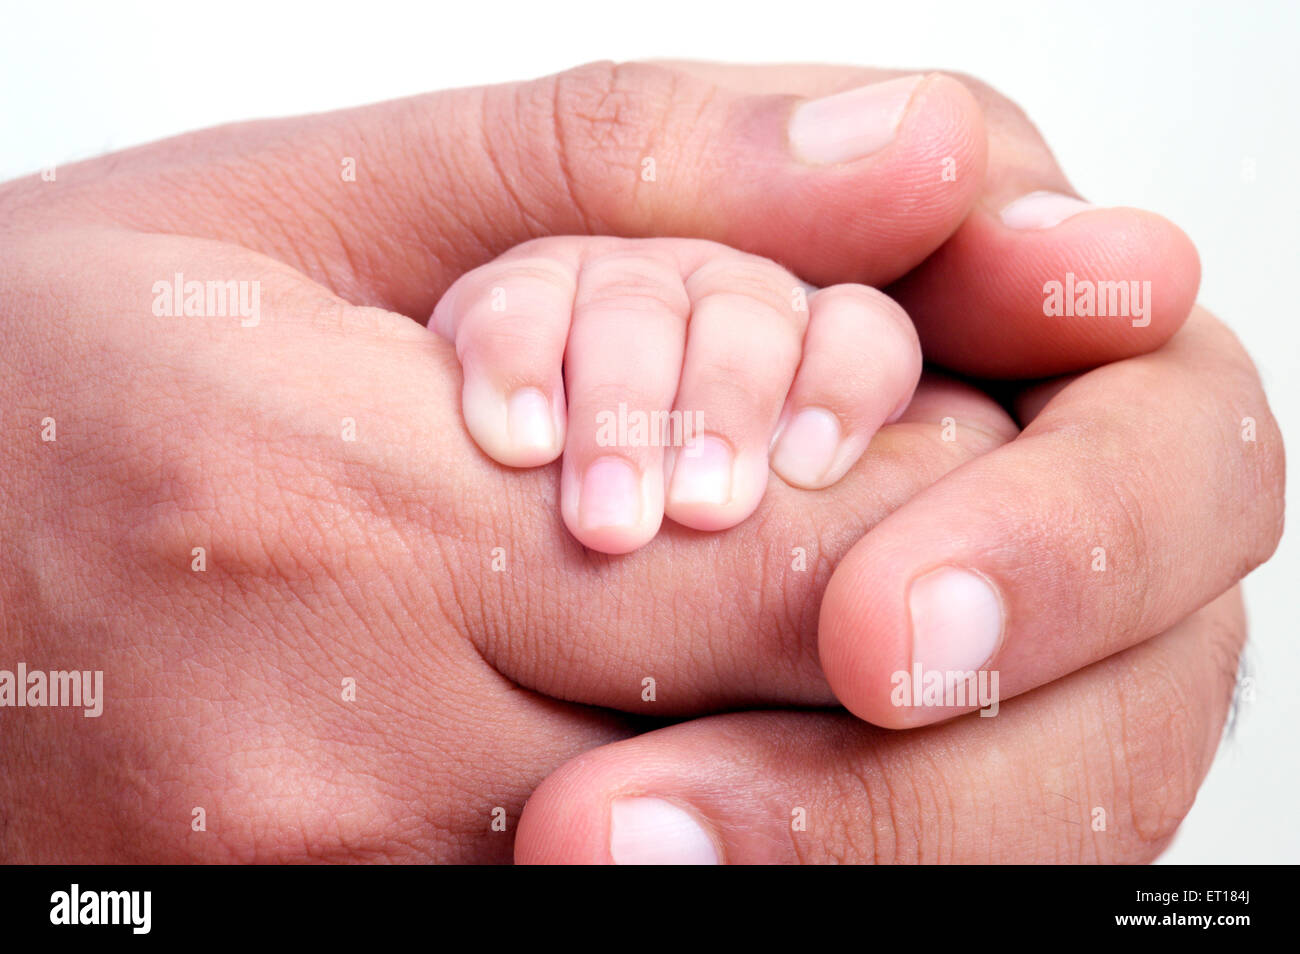 protection, protecting, care, love, caring, man father holding hand of new born baby, MR#736J&LA Stock Photo